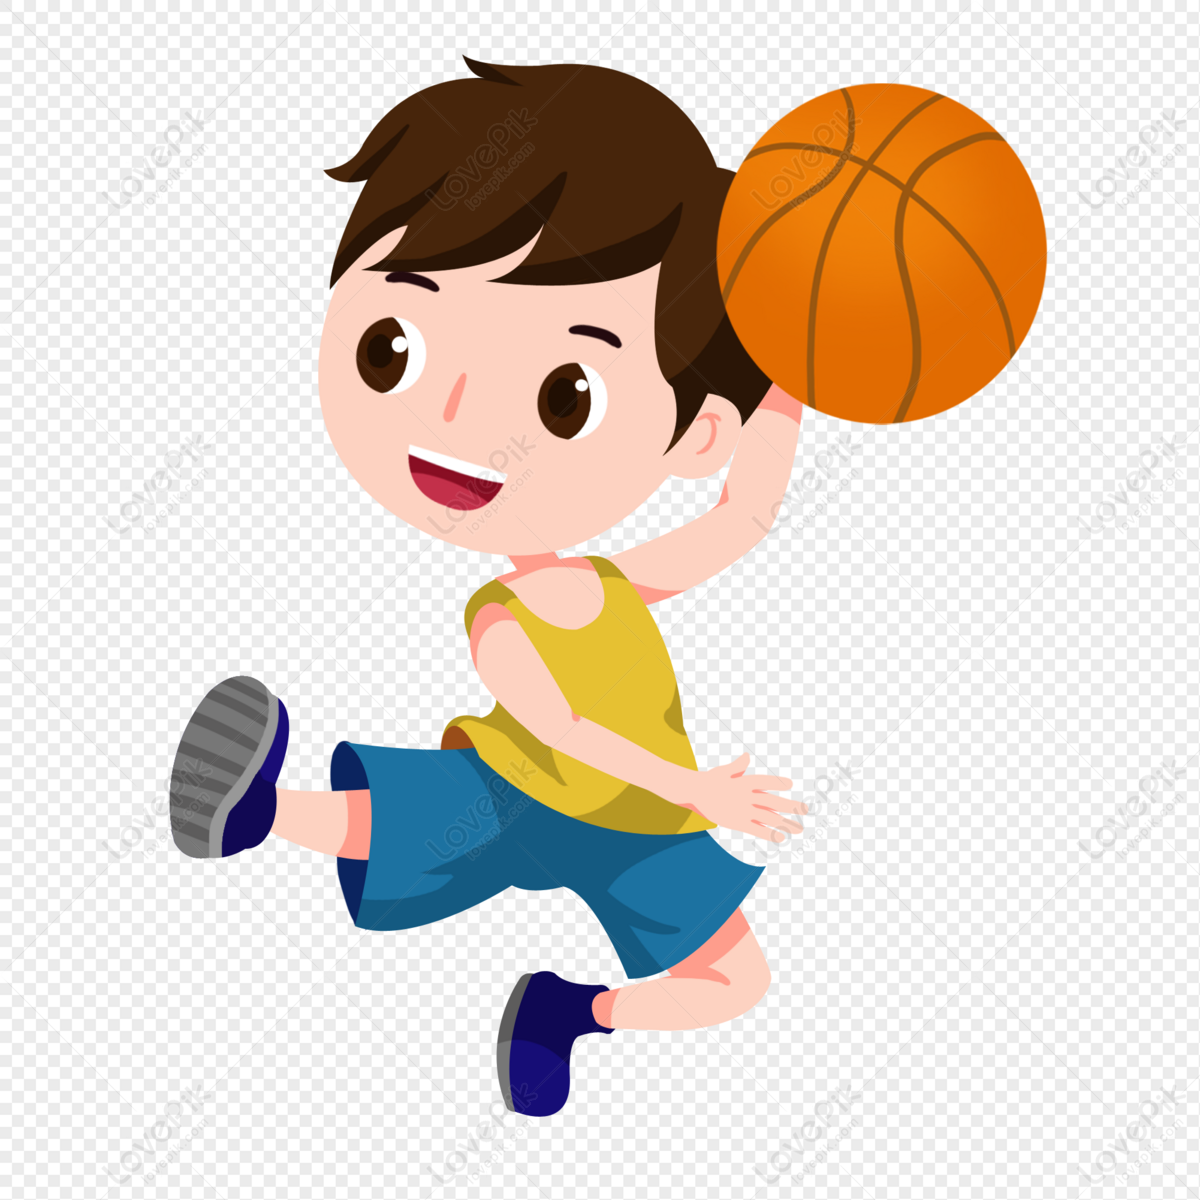 Cartoon Boy Playing Basketball PNG Transparent Image And Clipart Image For  Free Download - Lovepik | 401458607